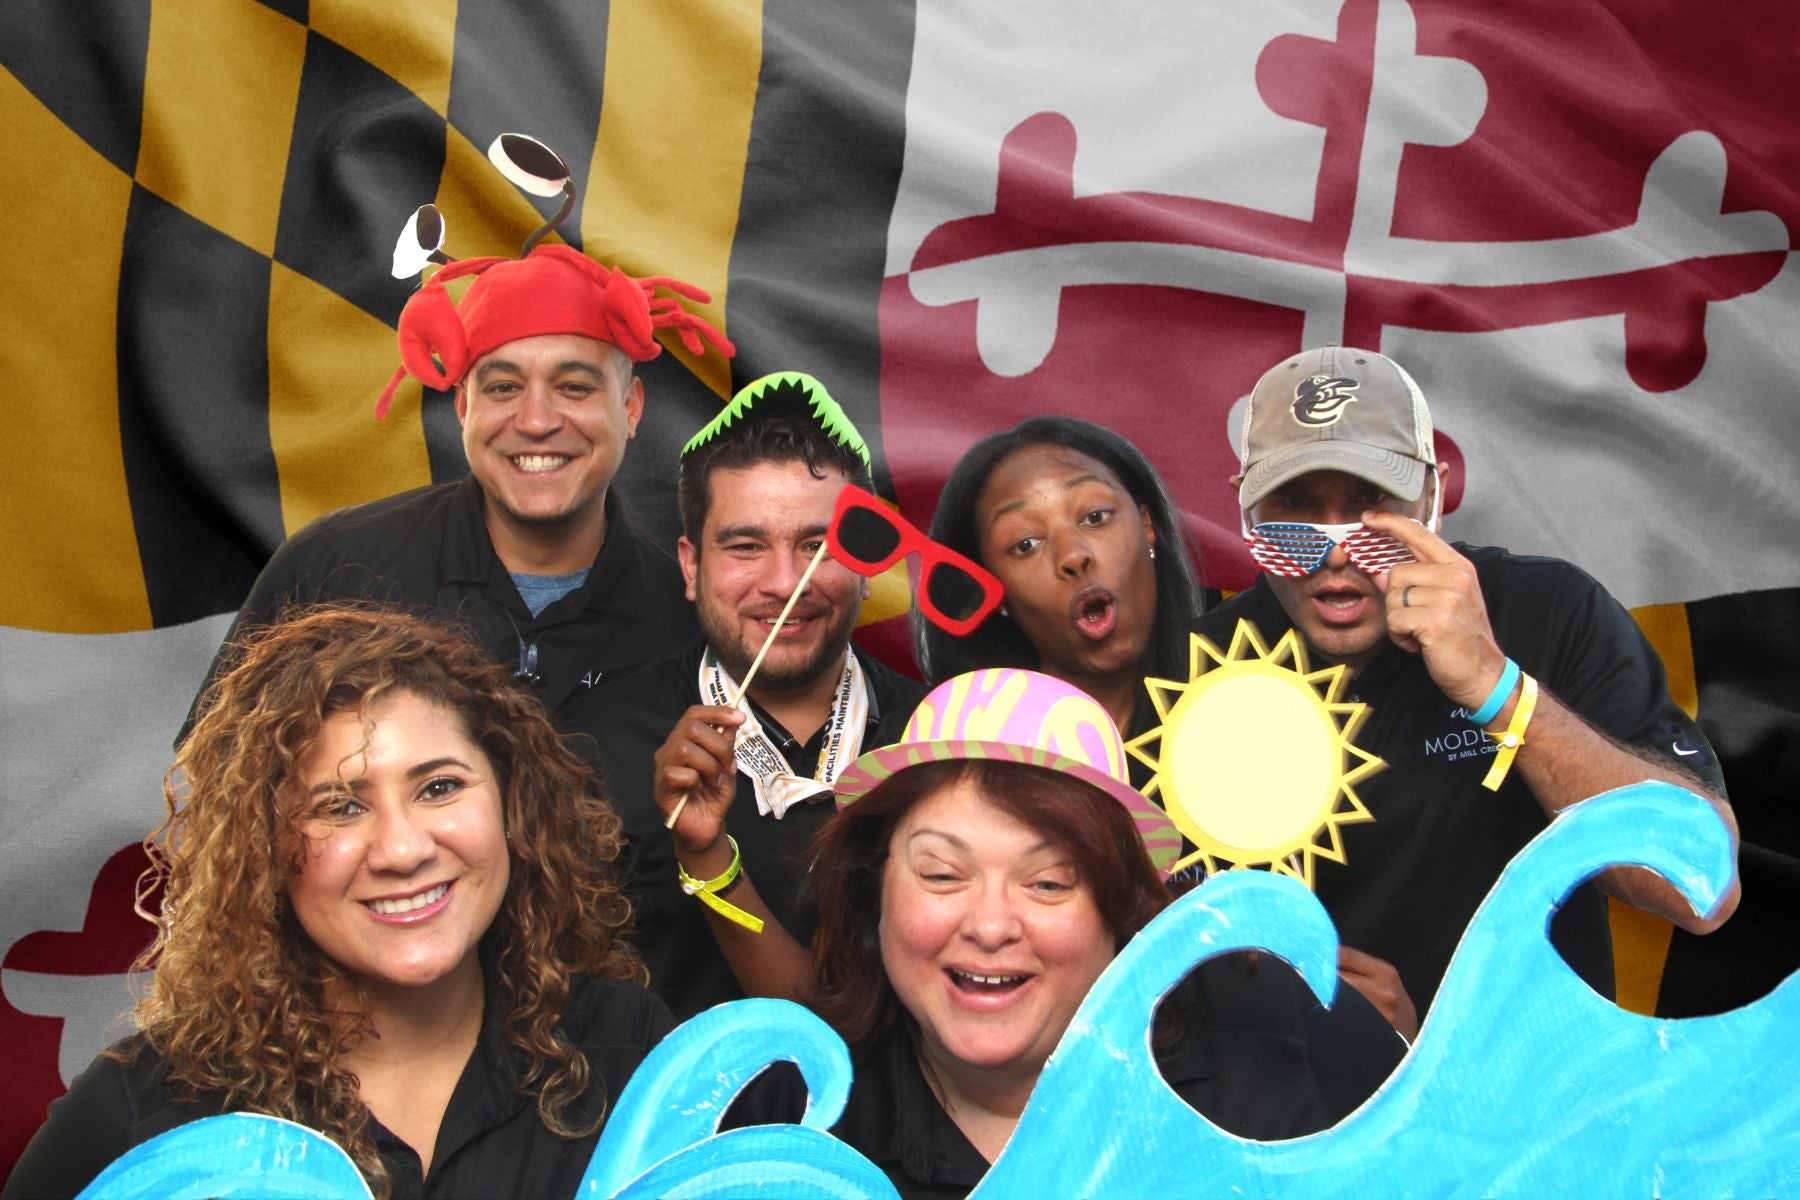 Maryland photo booth fun for a group of men and women in Baltimore